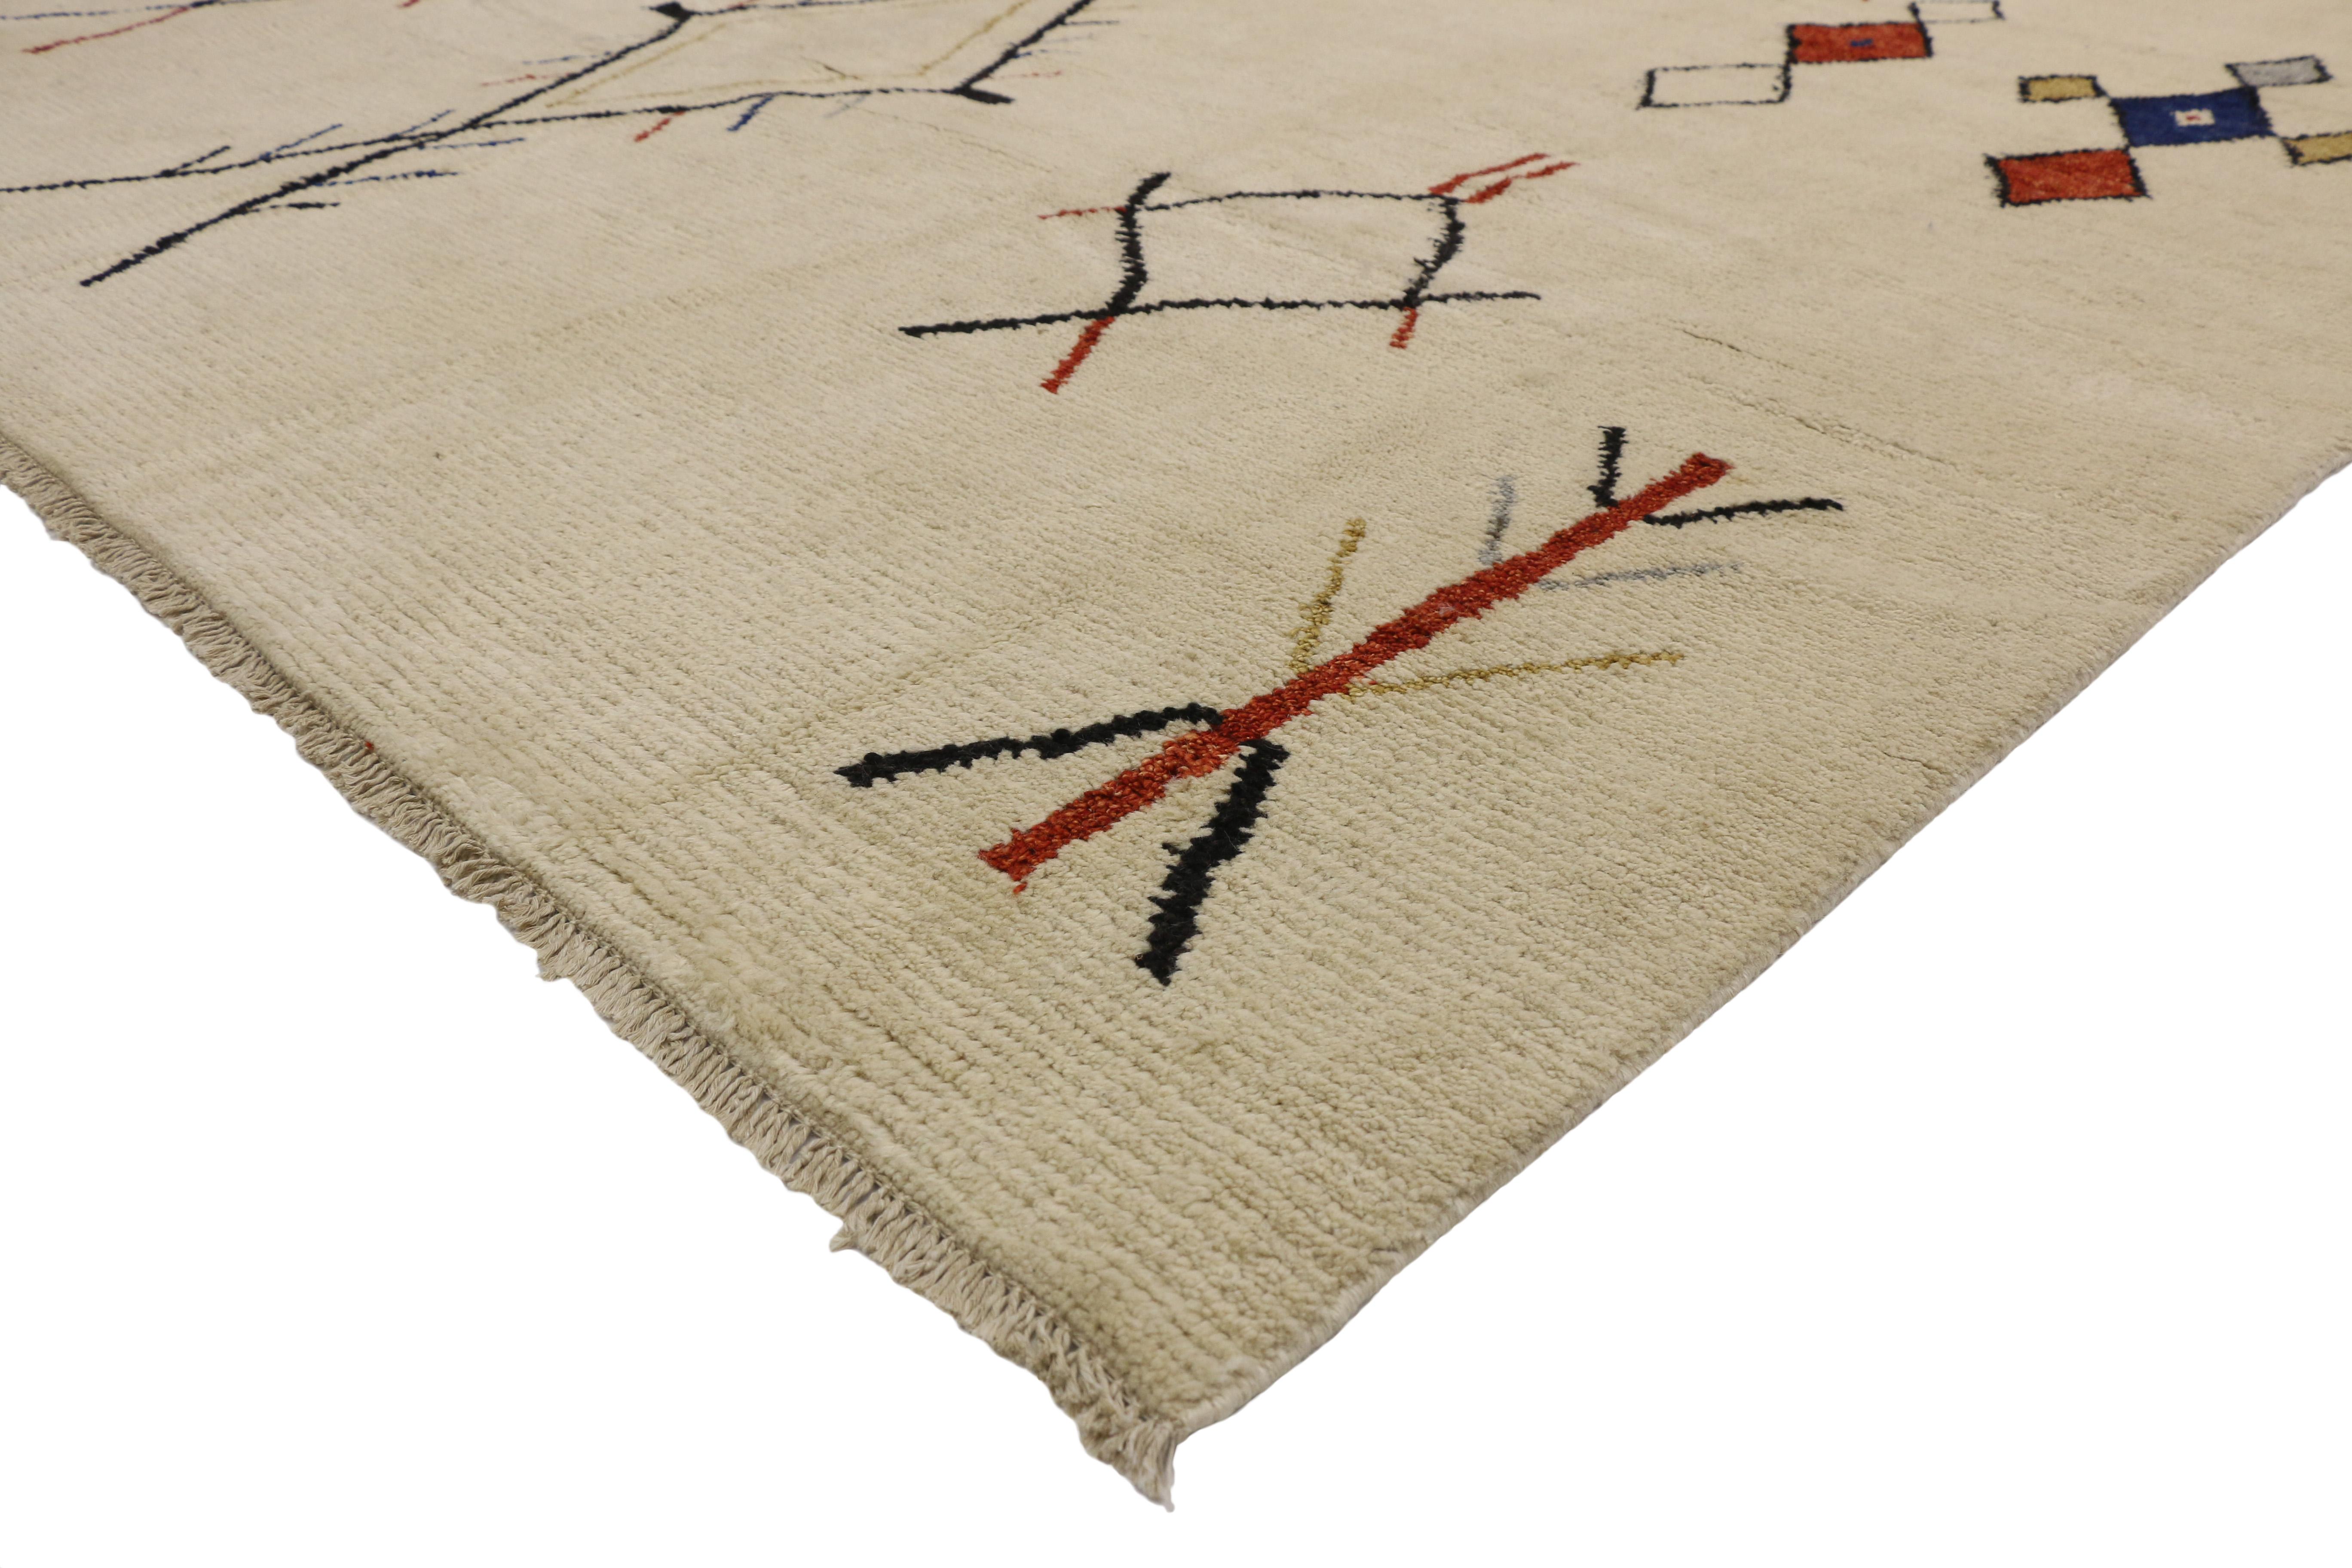 80520 New Contemporary Moroccan Area Rug with Adirondack and Nomadic Tribal Style 10'03 x 13'07. Nomadic tribal design and Adirondack style combined with a plush pile, this hand-knotted wool contemporary Moroccan area features three diamond lozenges